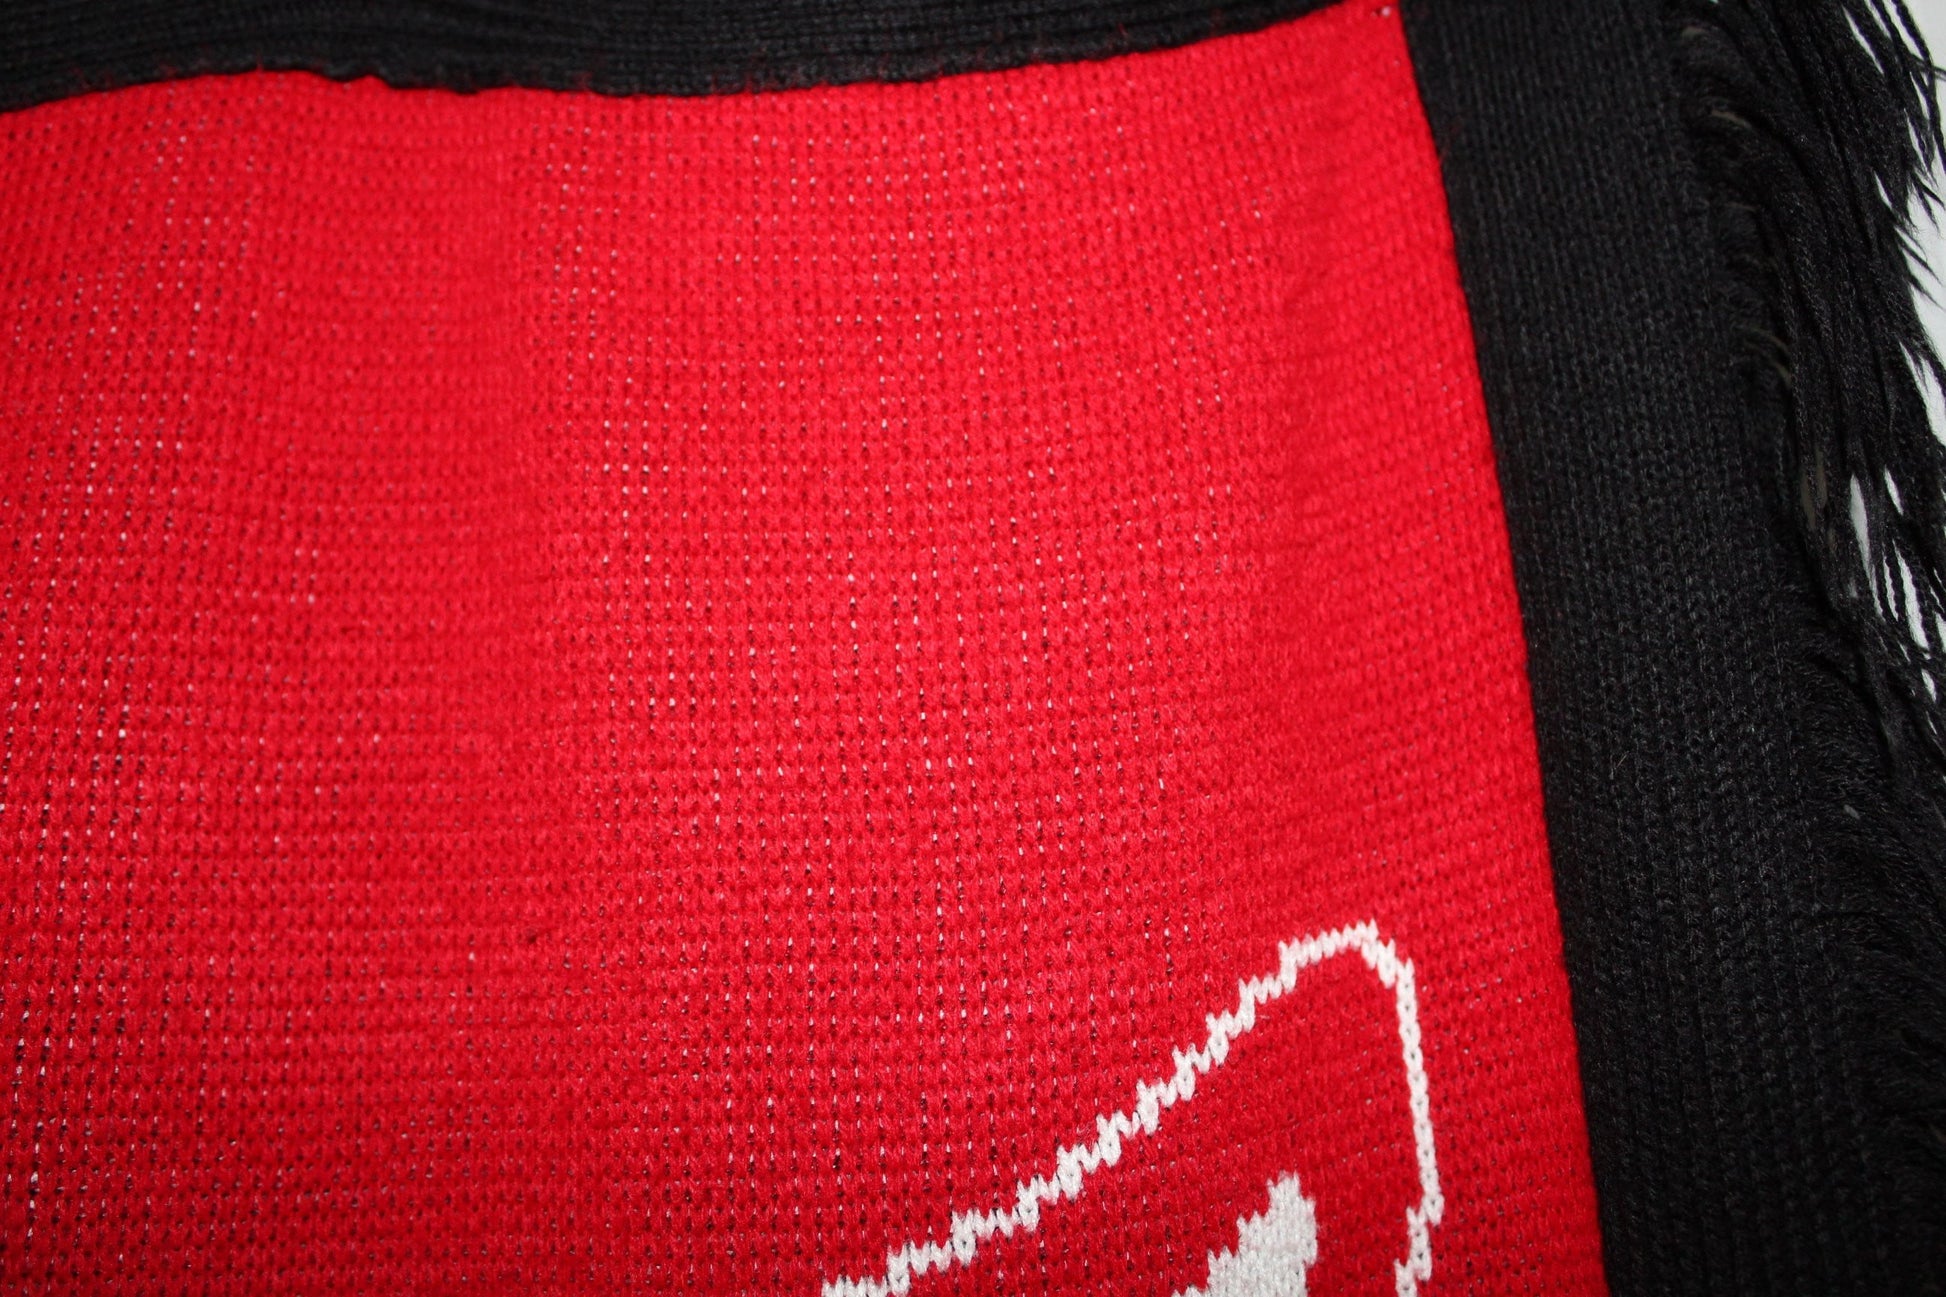 Detroit Red Wings Throw Blanket  Acrylic Knit Logo Sweater Weave soft